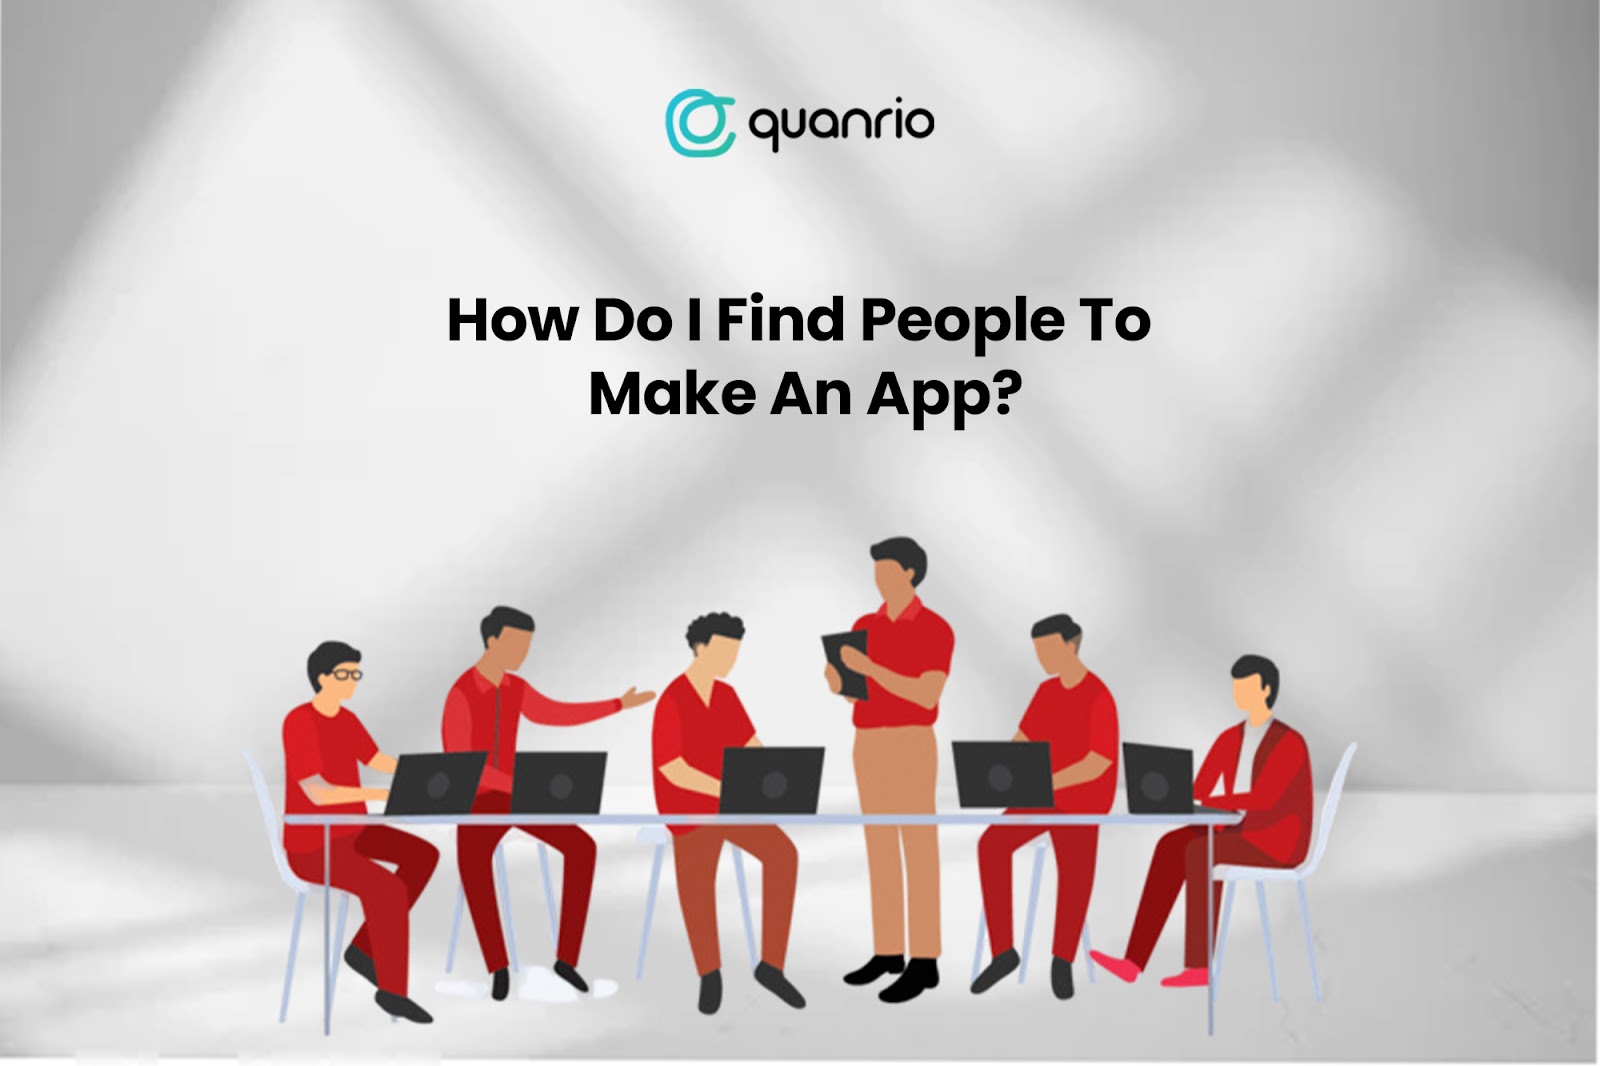 How Do I Find People To Make An App?